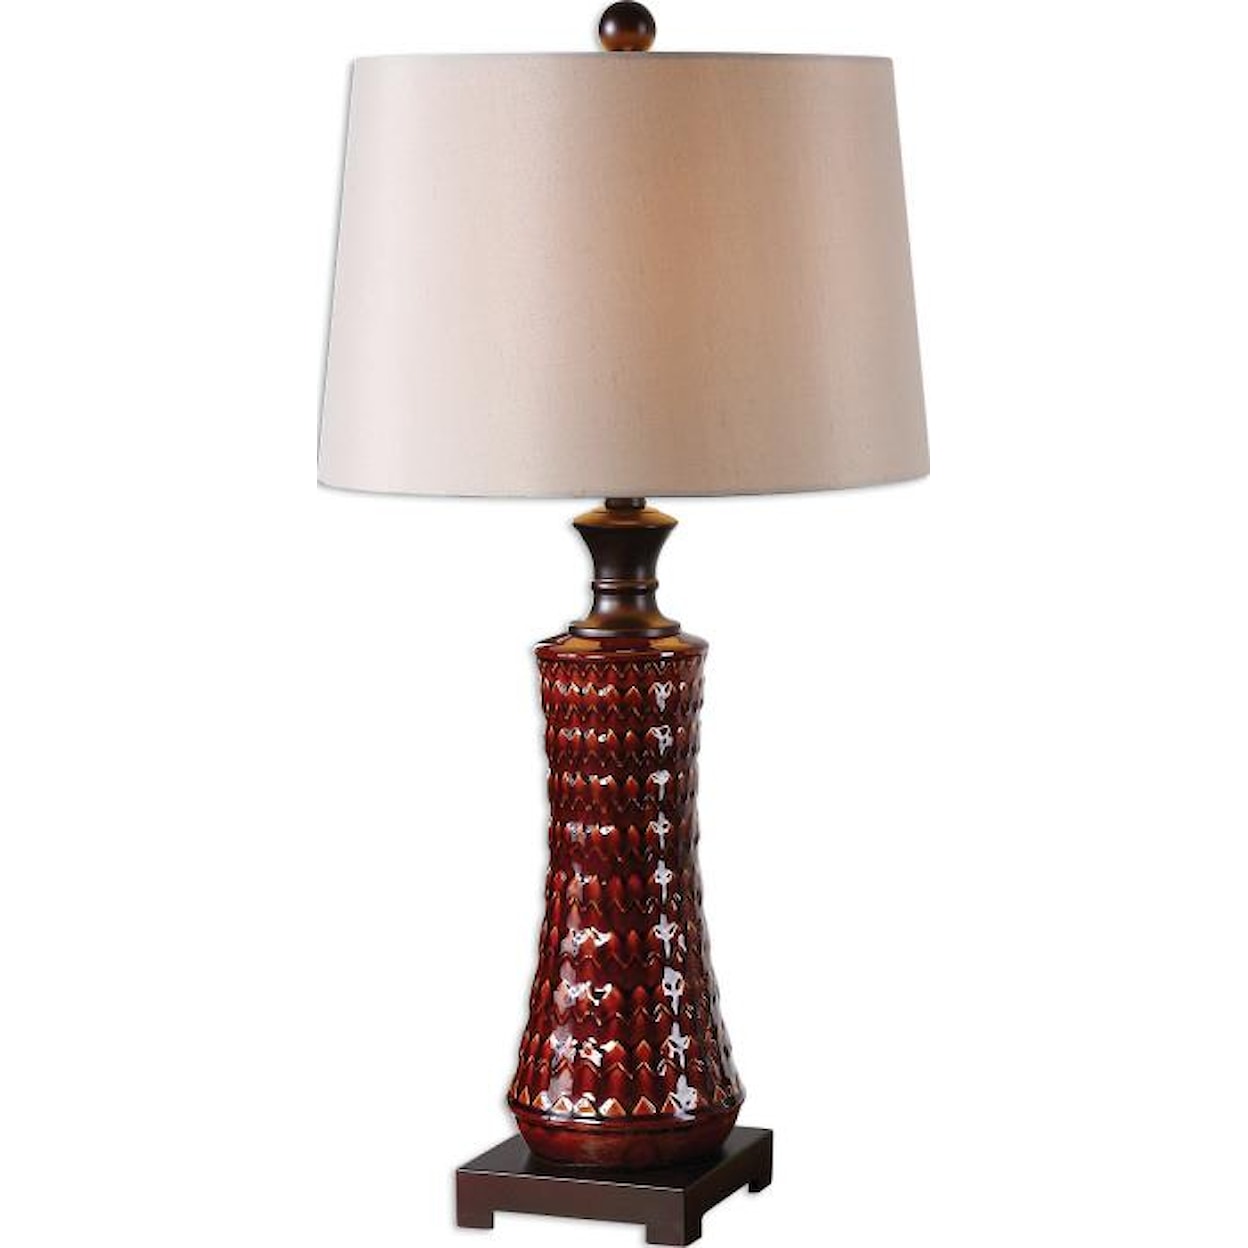 Uttermost Table Lamps Cassian Table Lamp